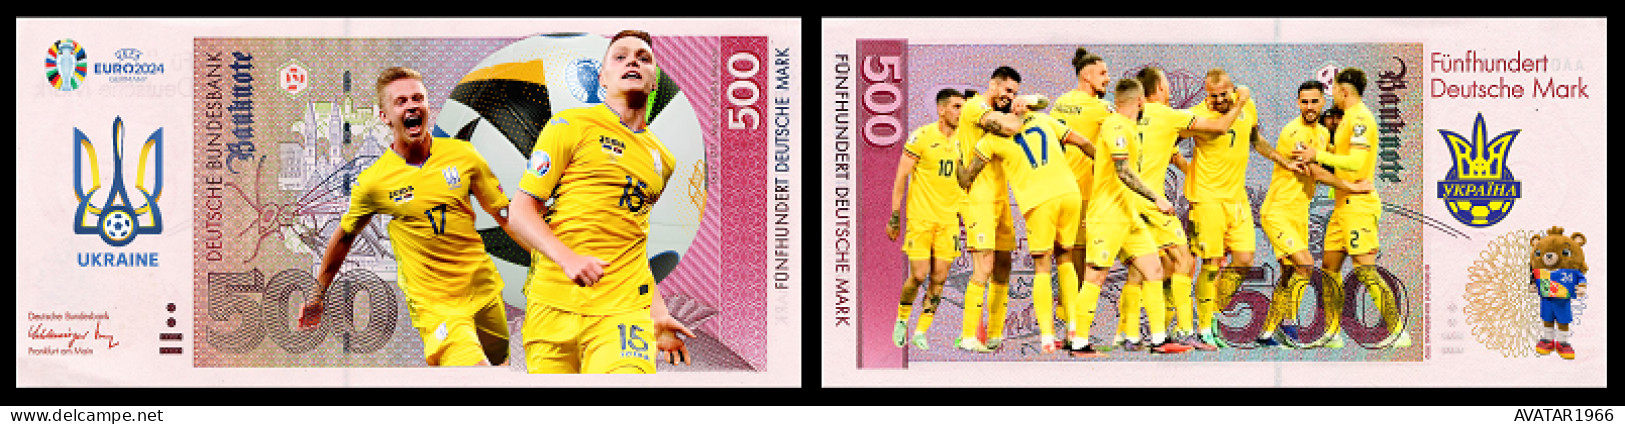 UEFA European Football Championship 2024 qualified country Ukraine 8 pieces Germany fantasy paper money